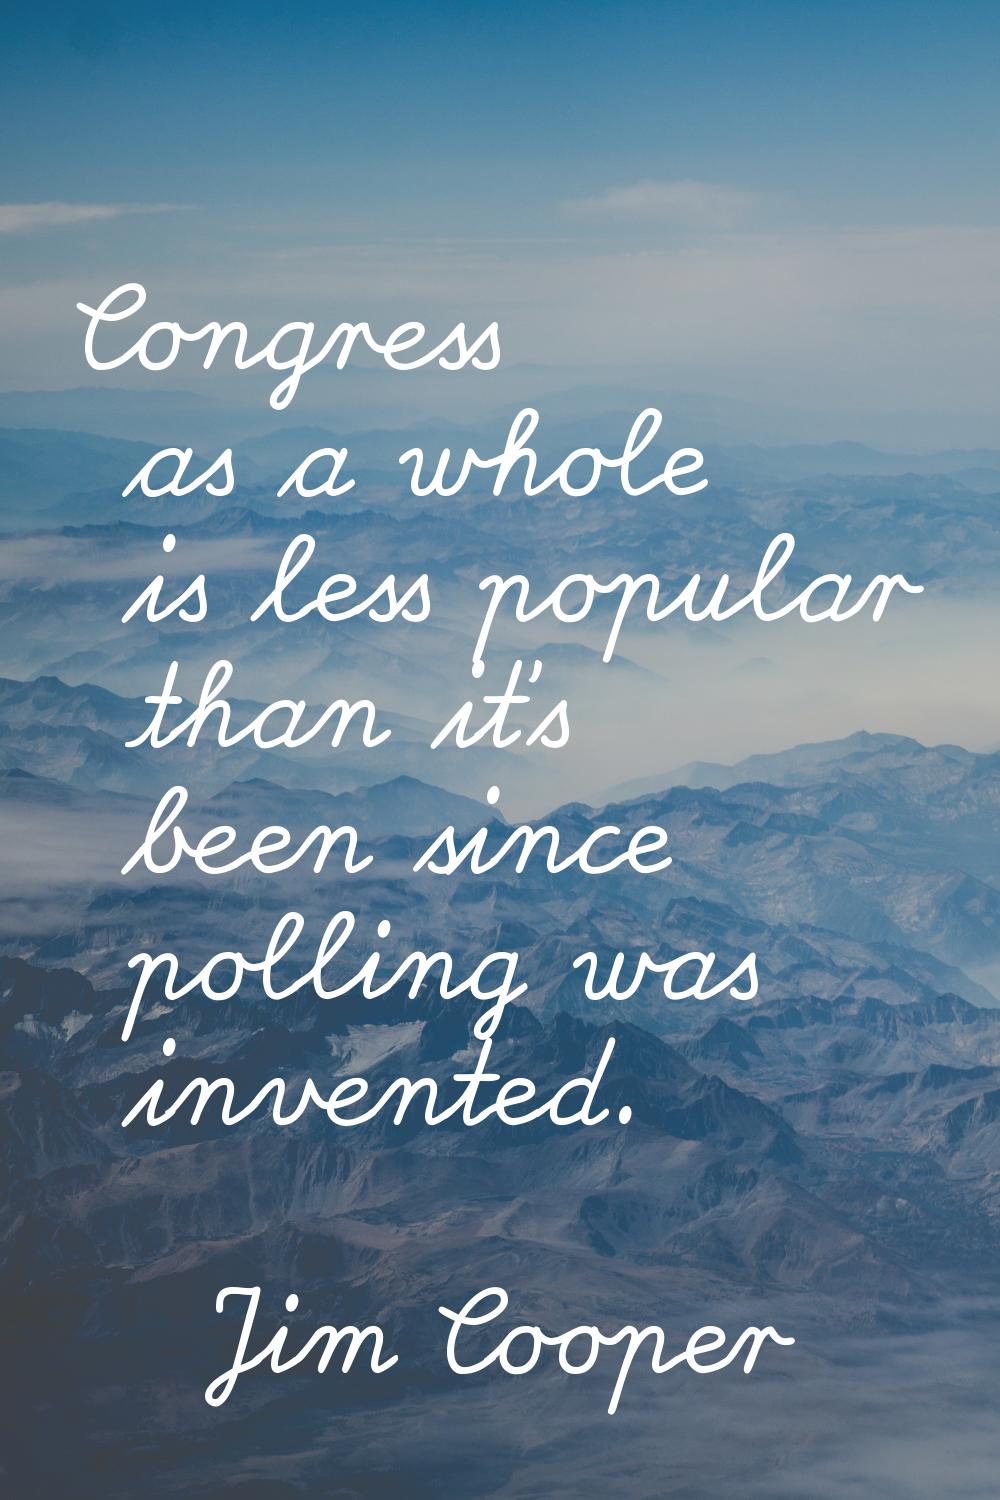 Congress as a whole is less popular than it's been since polling was invented.